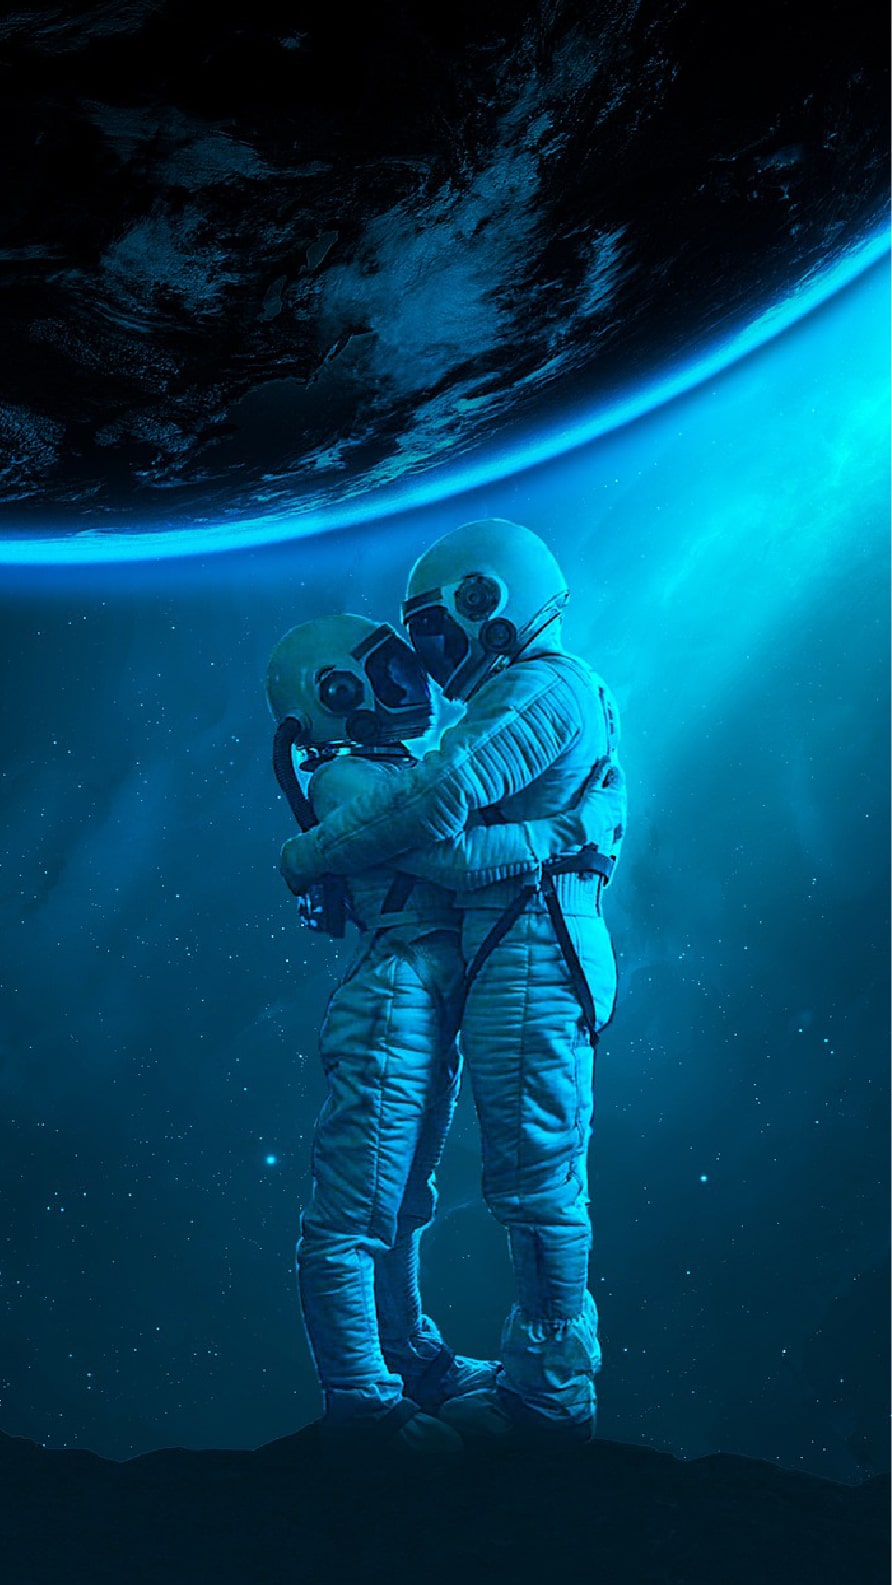 iPhone wallpapers featuring astronauts